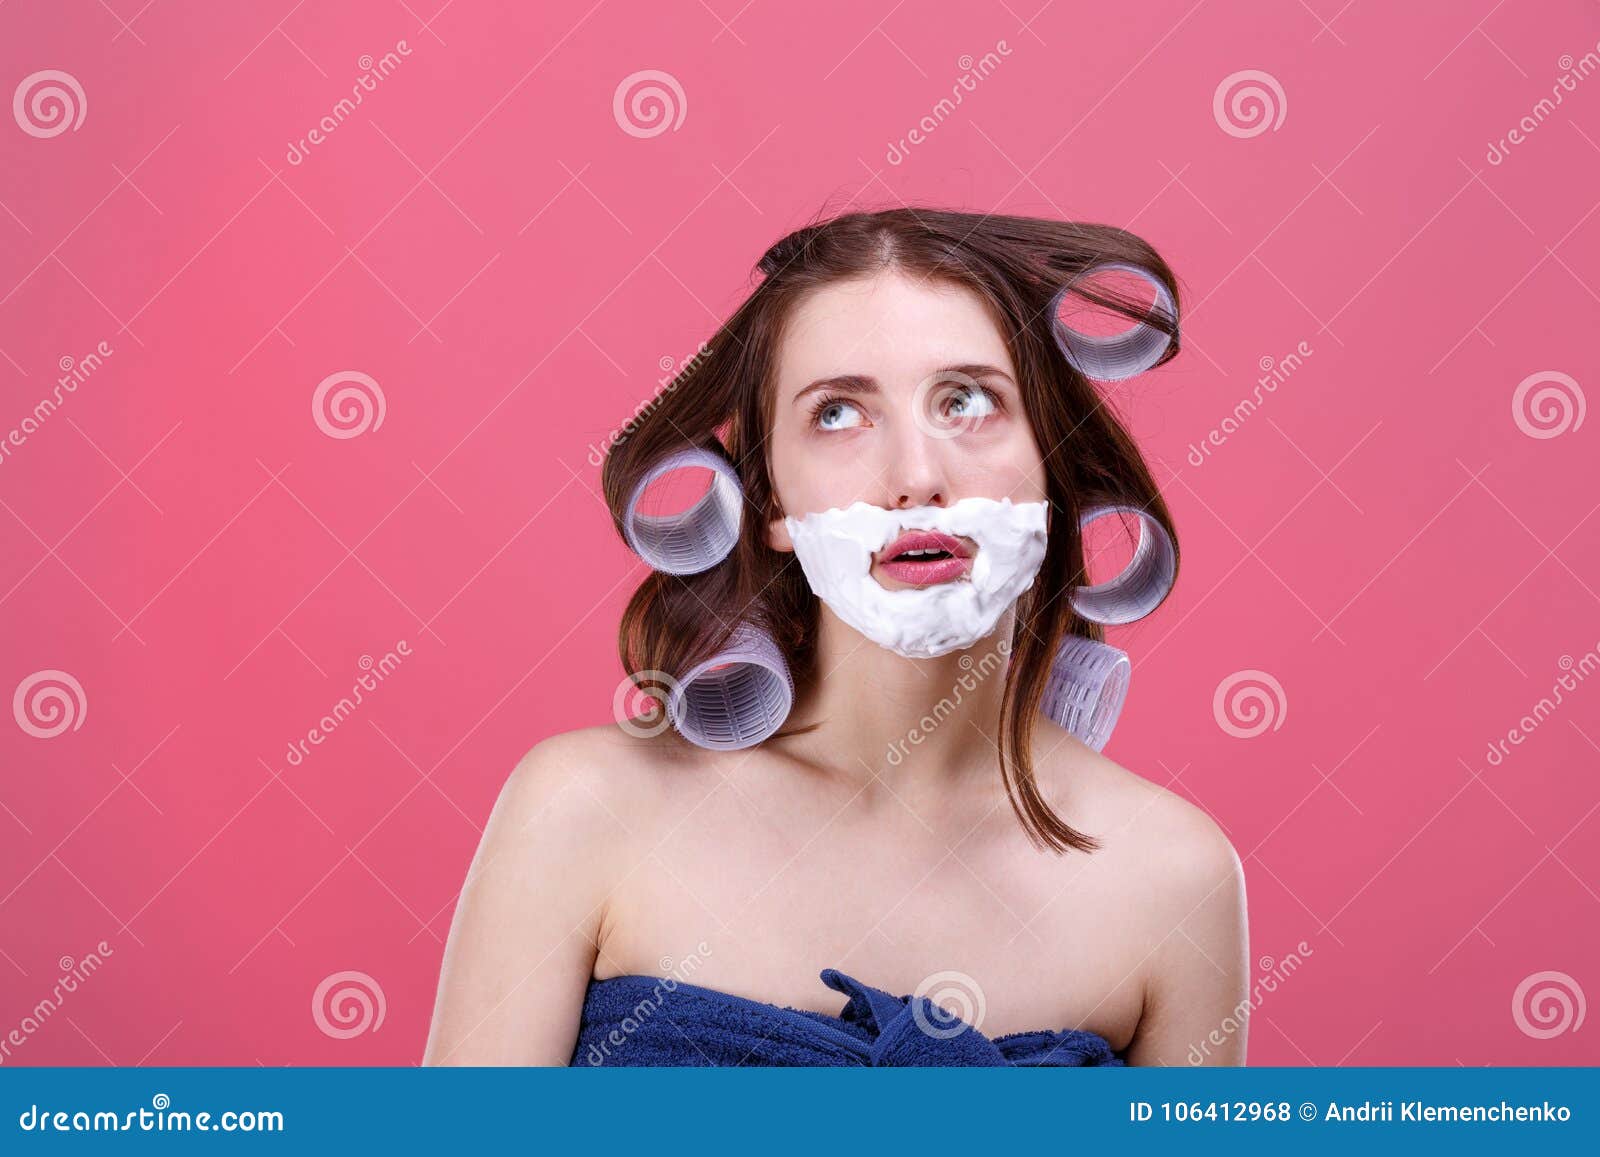 A thoughtful girl, with curlers on hair and with shaving foam on face, looks up with her mouth open. A thoughtful young girl, with large curlers on her hair and with shaving foam on her face, looks up with her mouth open. On a pink background.